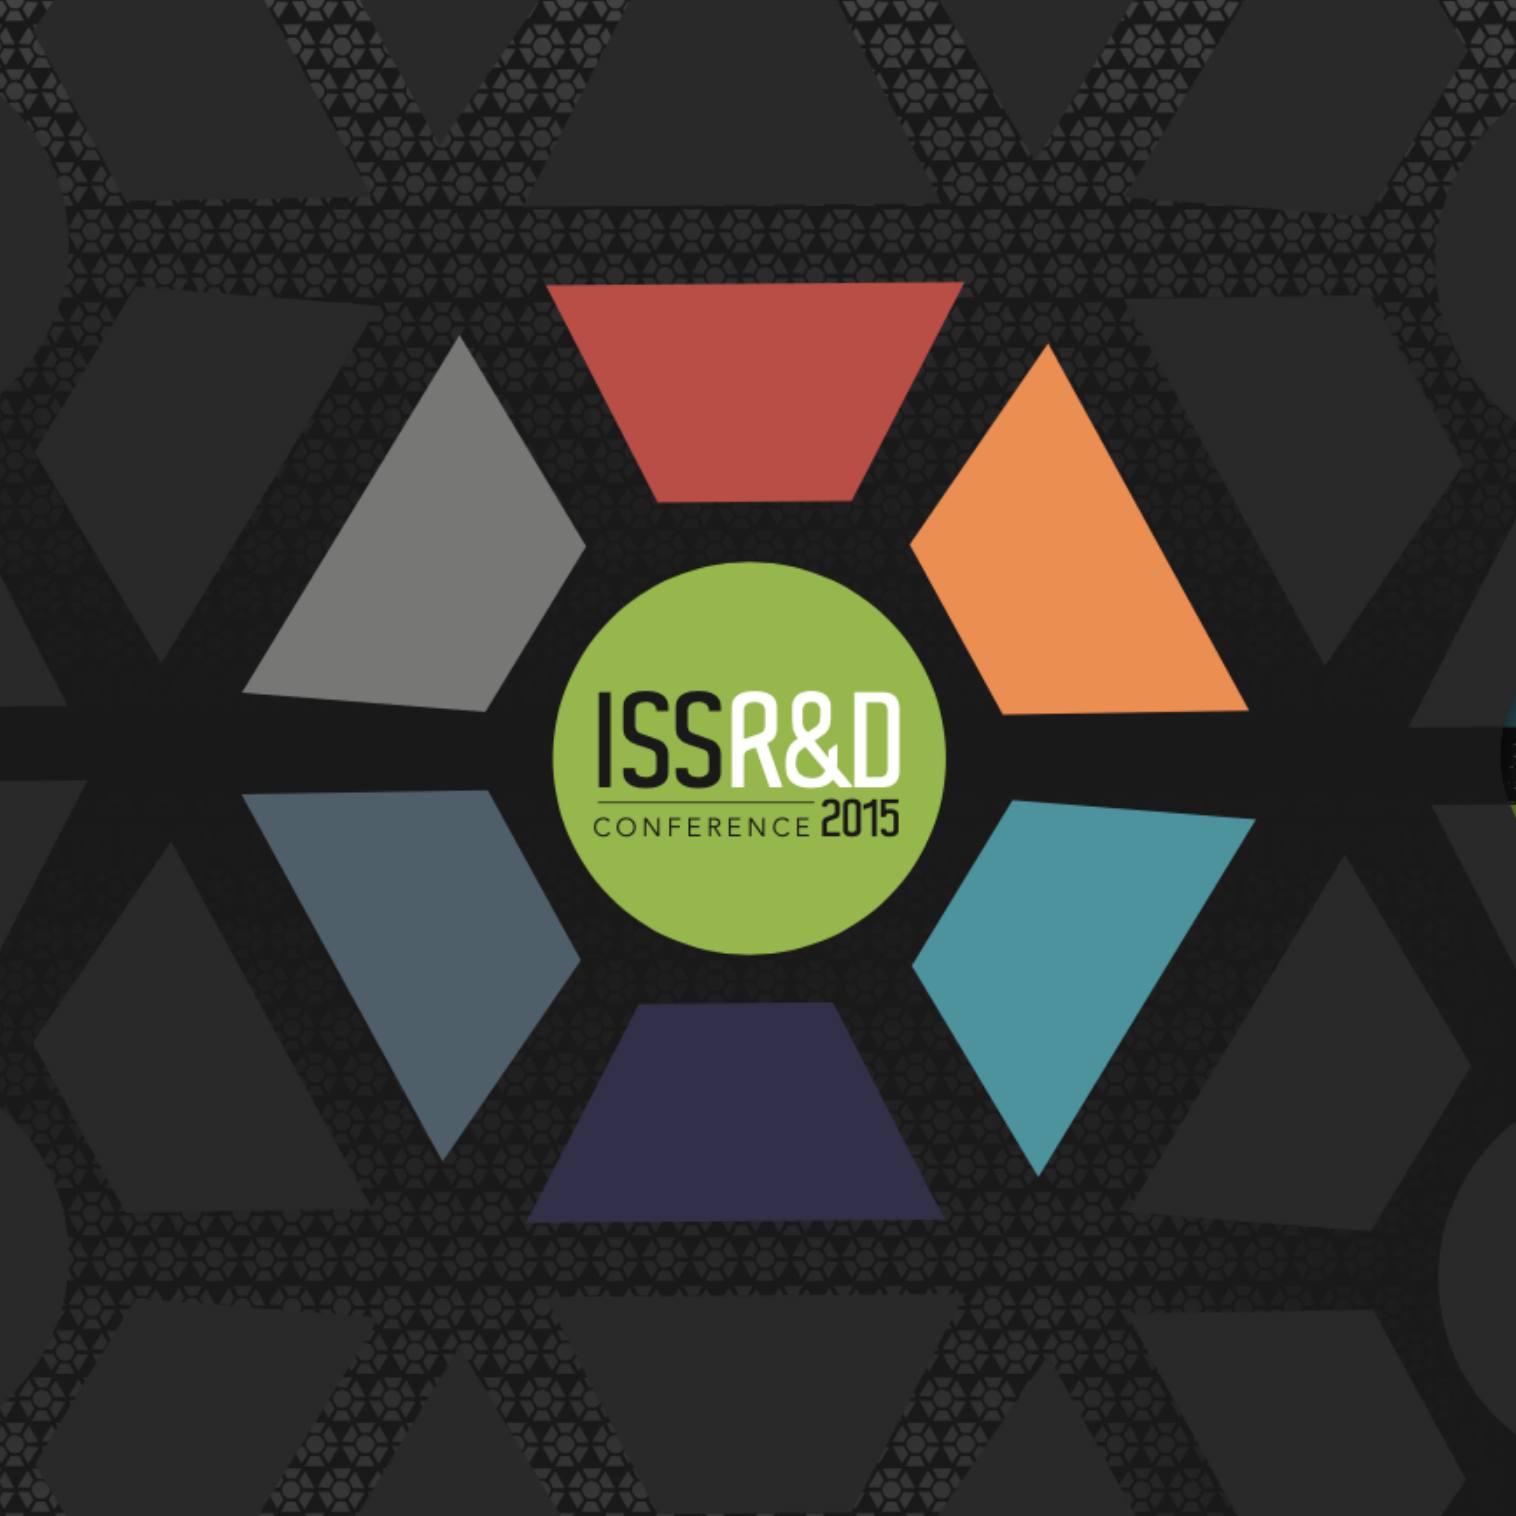 ISS R&D Conference